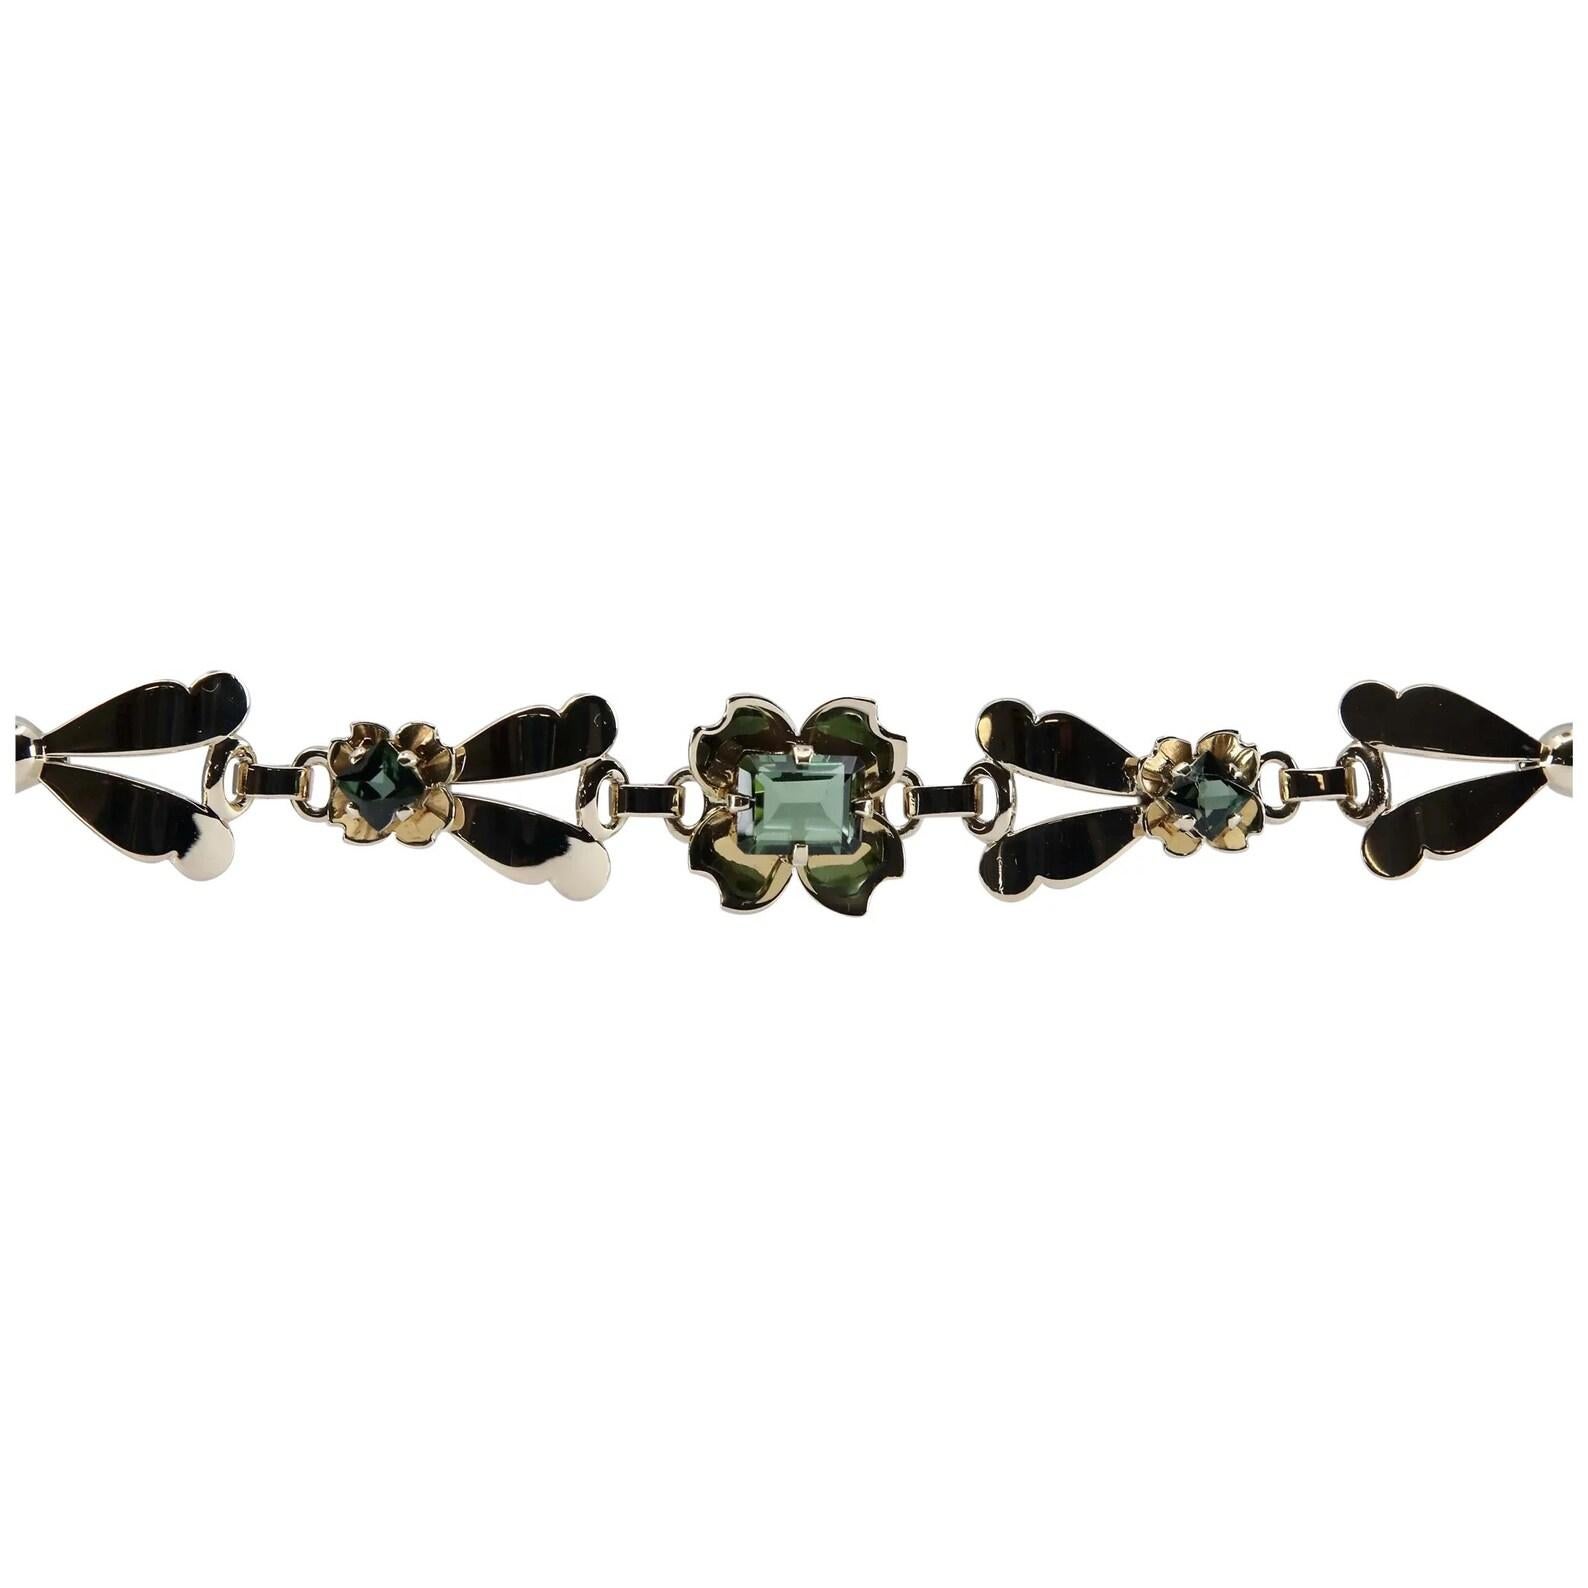 A vintage Tiffany & Company retro four leaf clover green tourmaline bracelet in 14 karat yellow gold. Centering this bracelet is a four leaf clover set with a rectangular 3 carat green tourmaline. Framing the center flower are stylized yellow gold